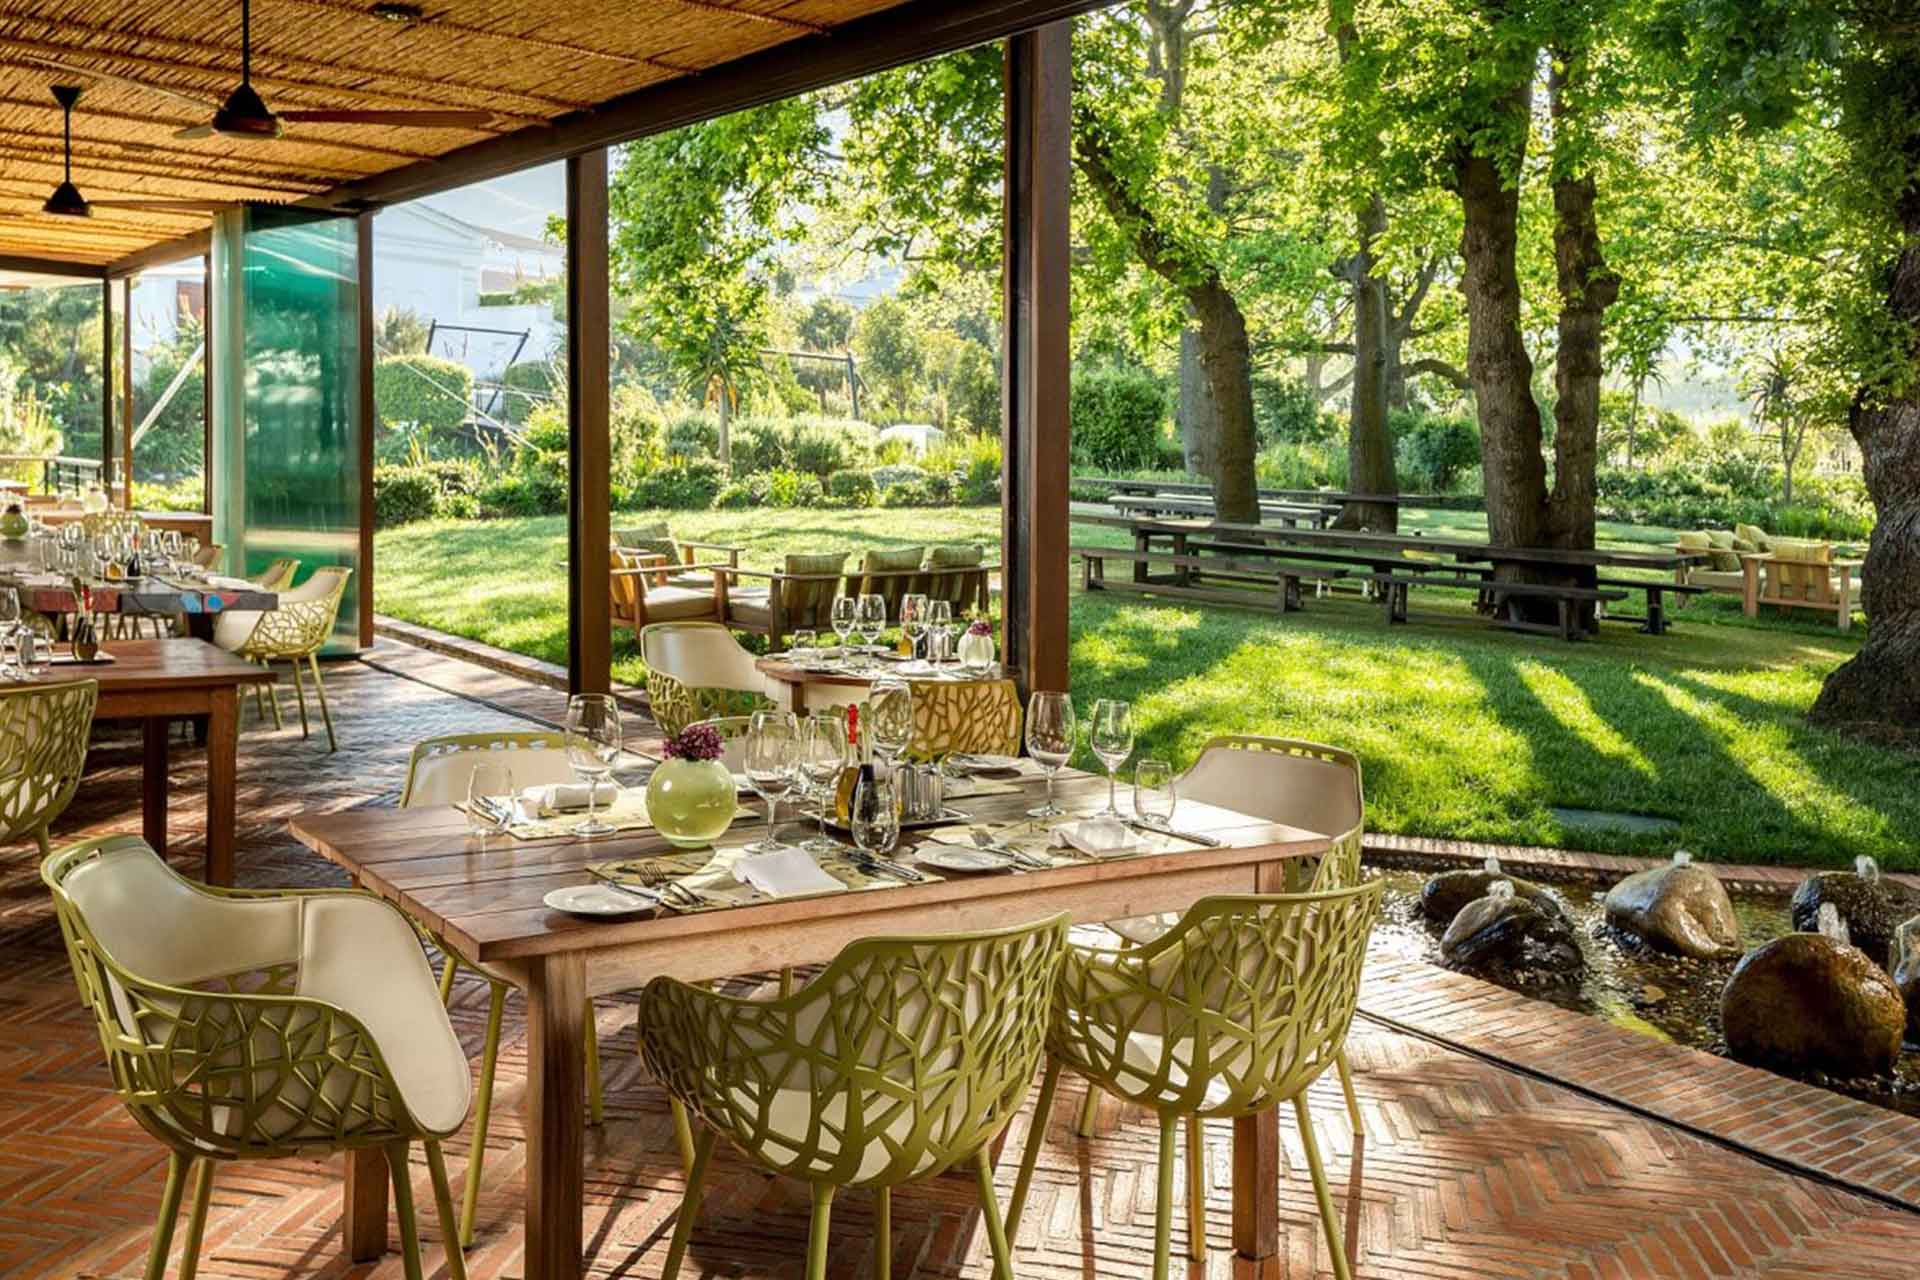 The terrace and gardens at Pierneef à La Motte restaurant – one of the top Cape Winelands restaurants.